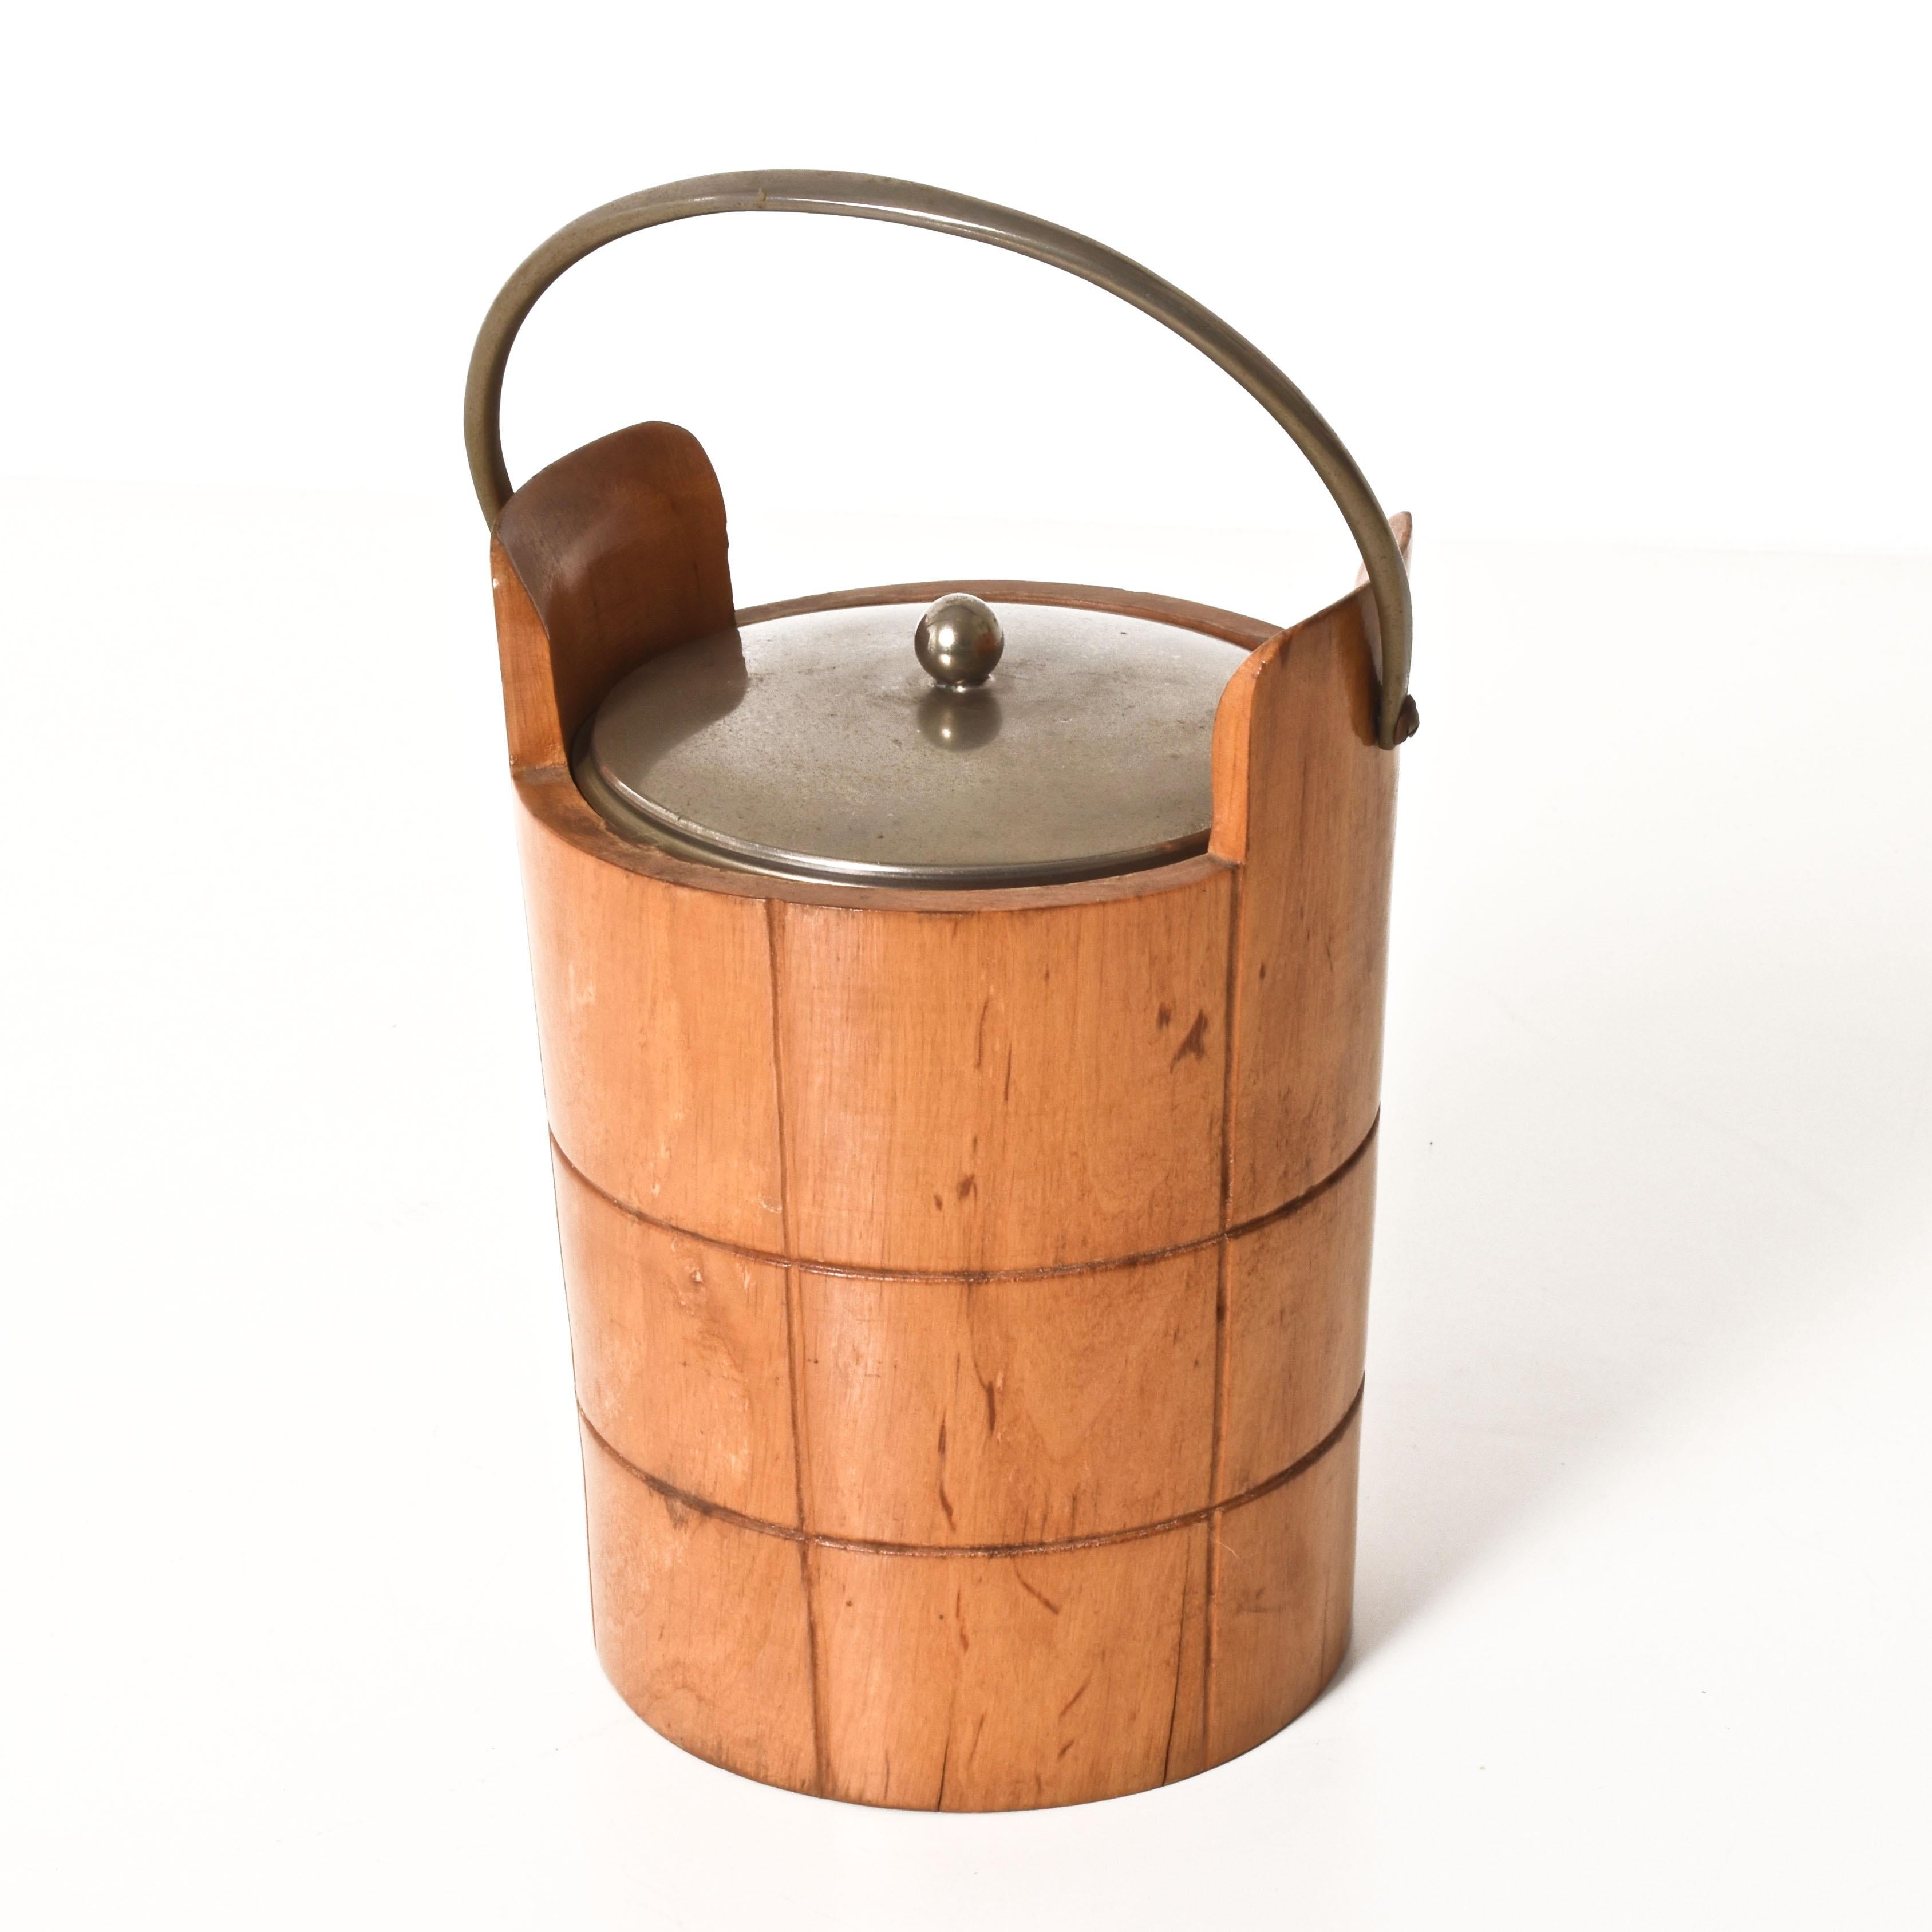 Elegant ice bucket by Aldo Tura for Macabo by Cusano Milanino
Carved wood with metal finishing’s. Aluminum tray inside.